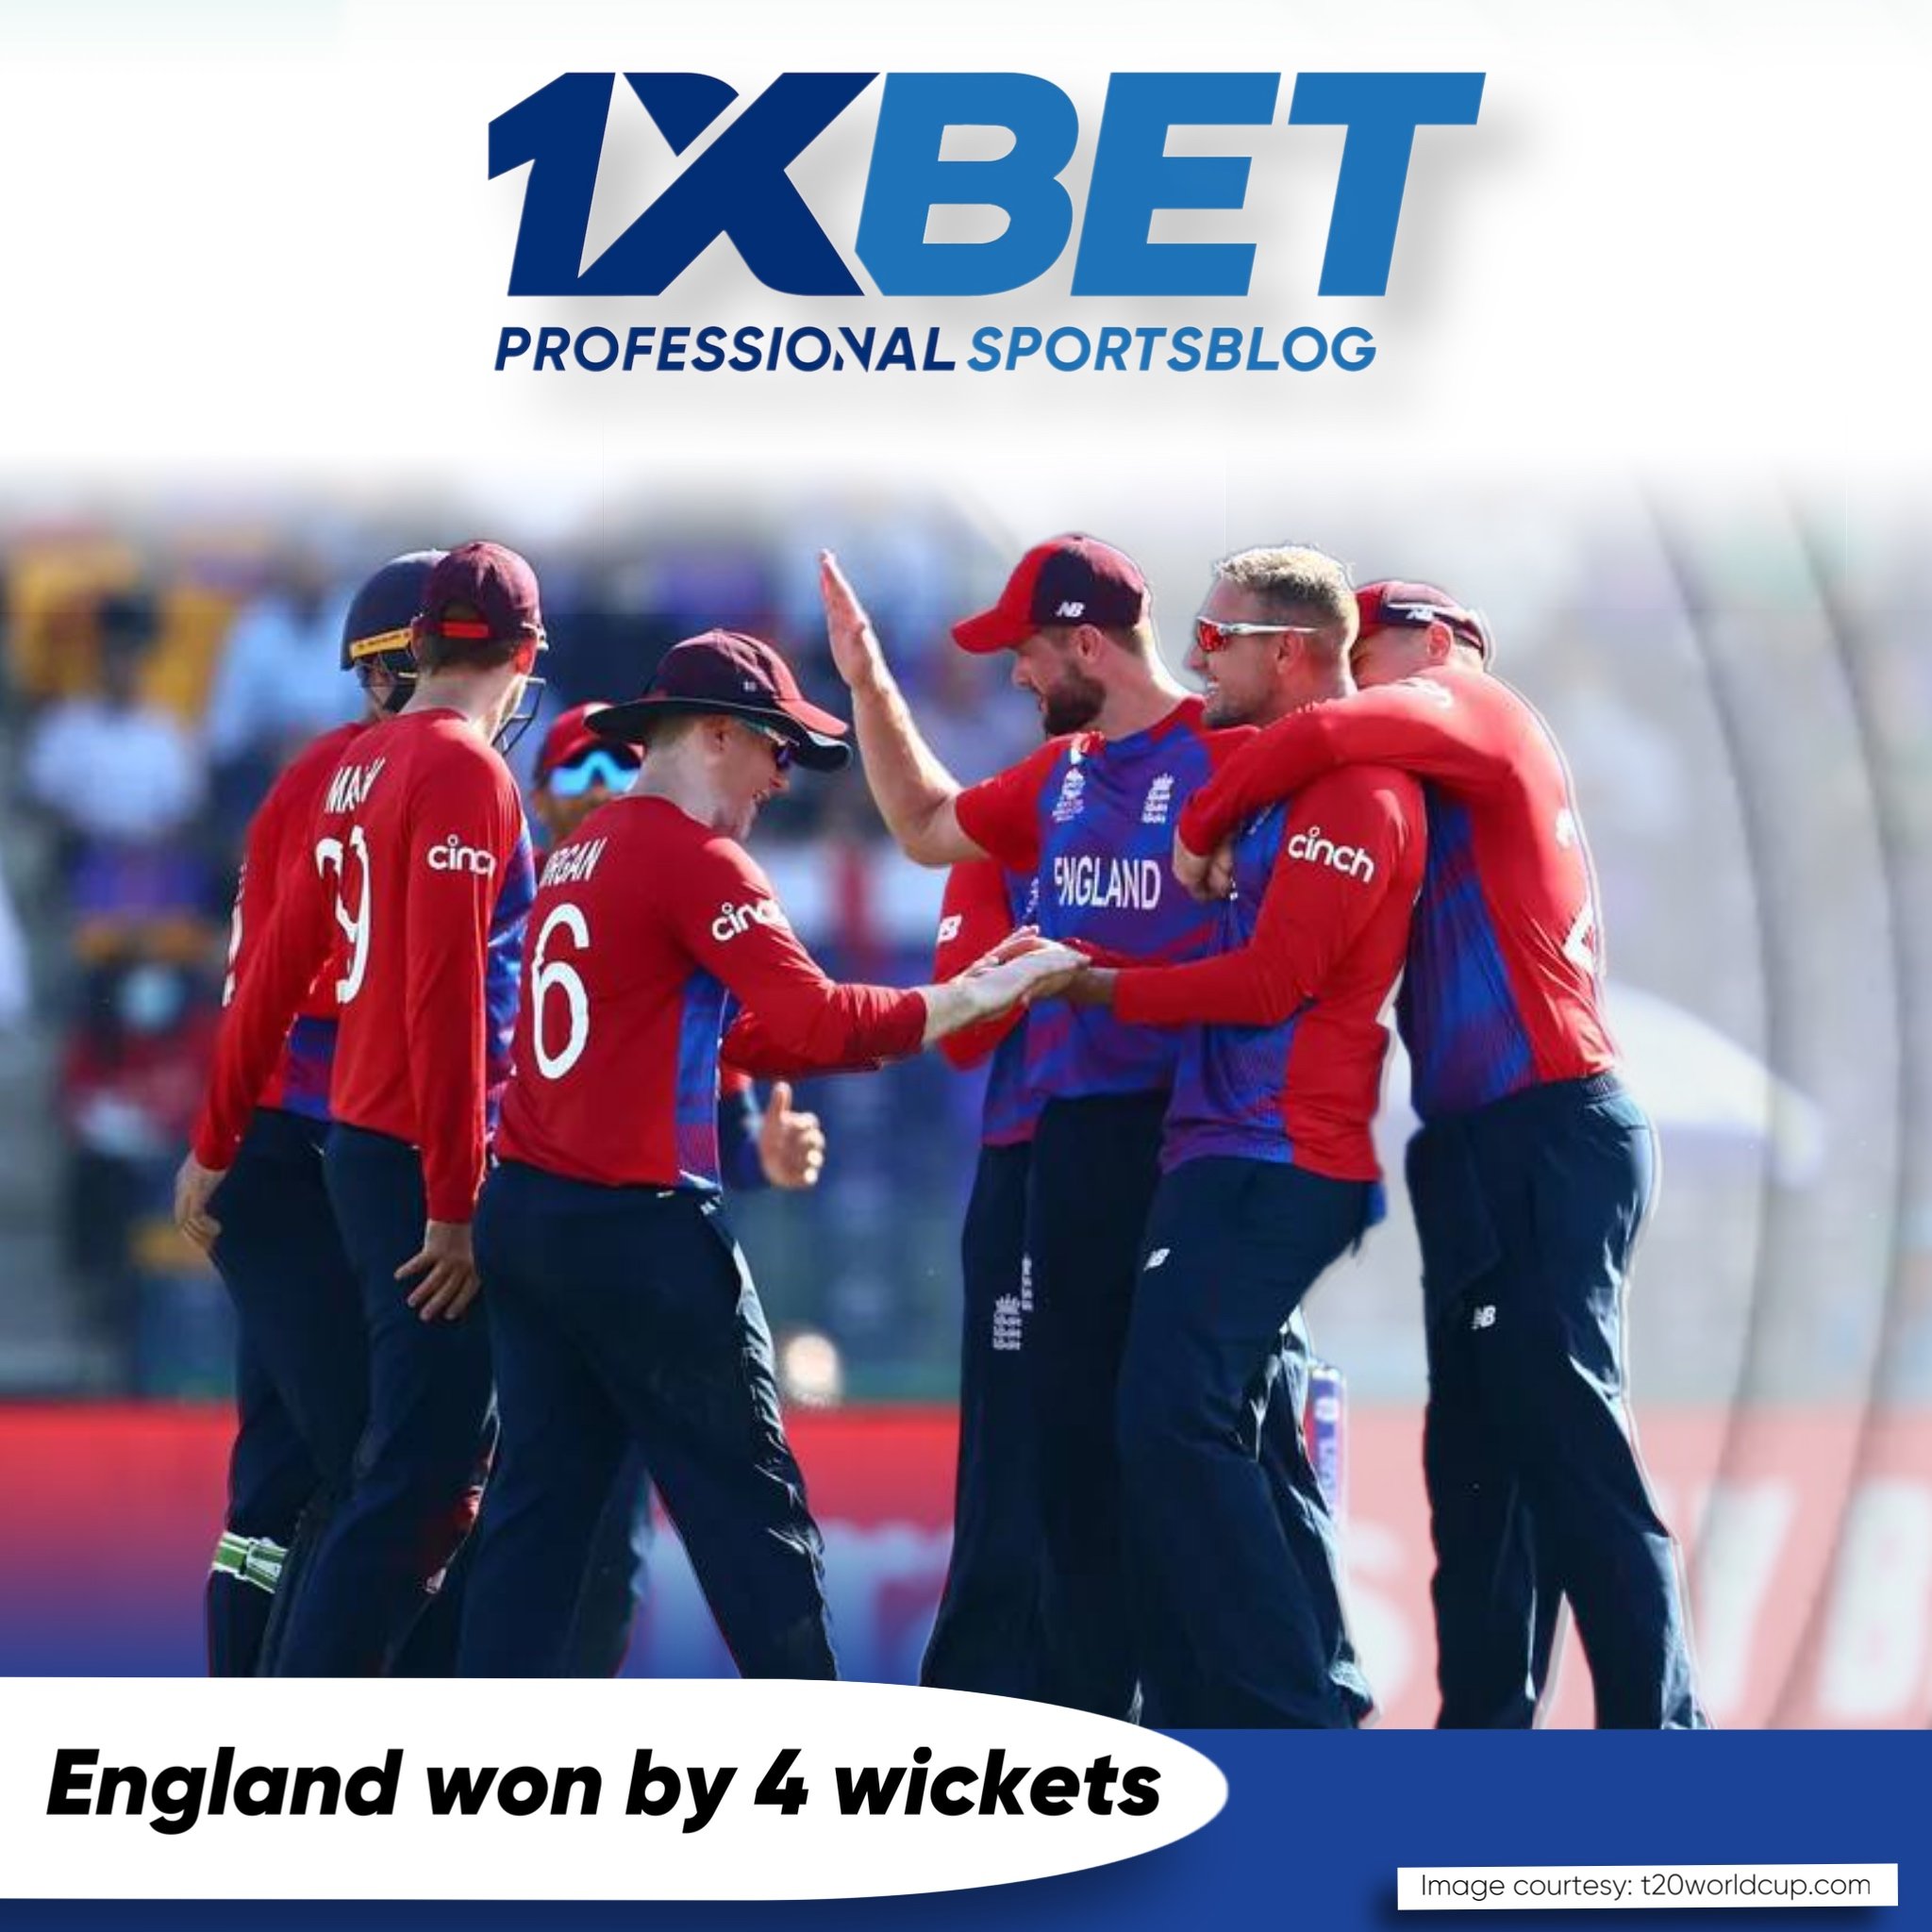 England won by 4 wickets